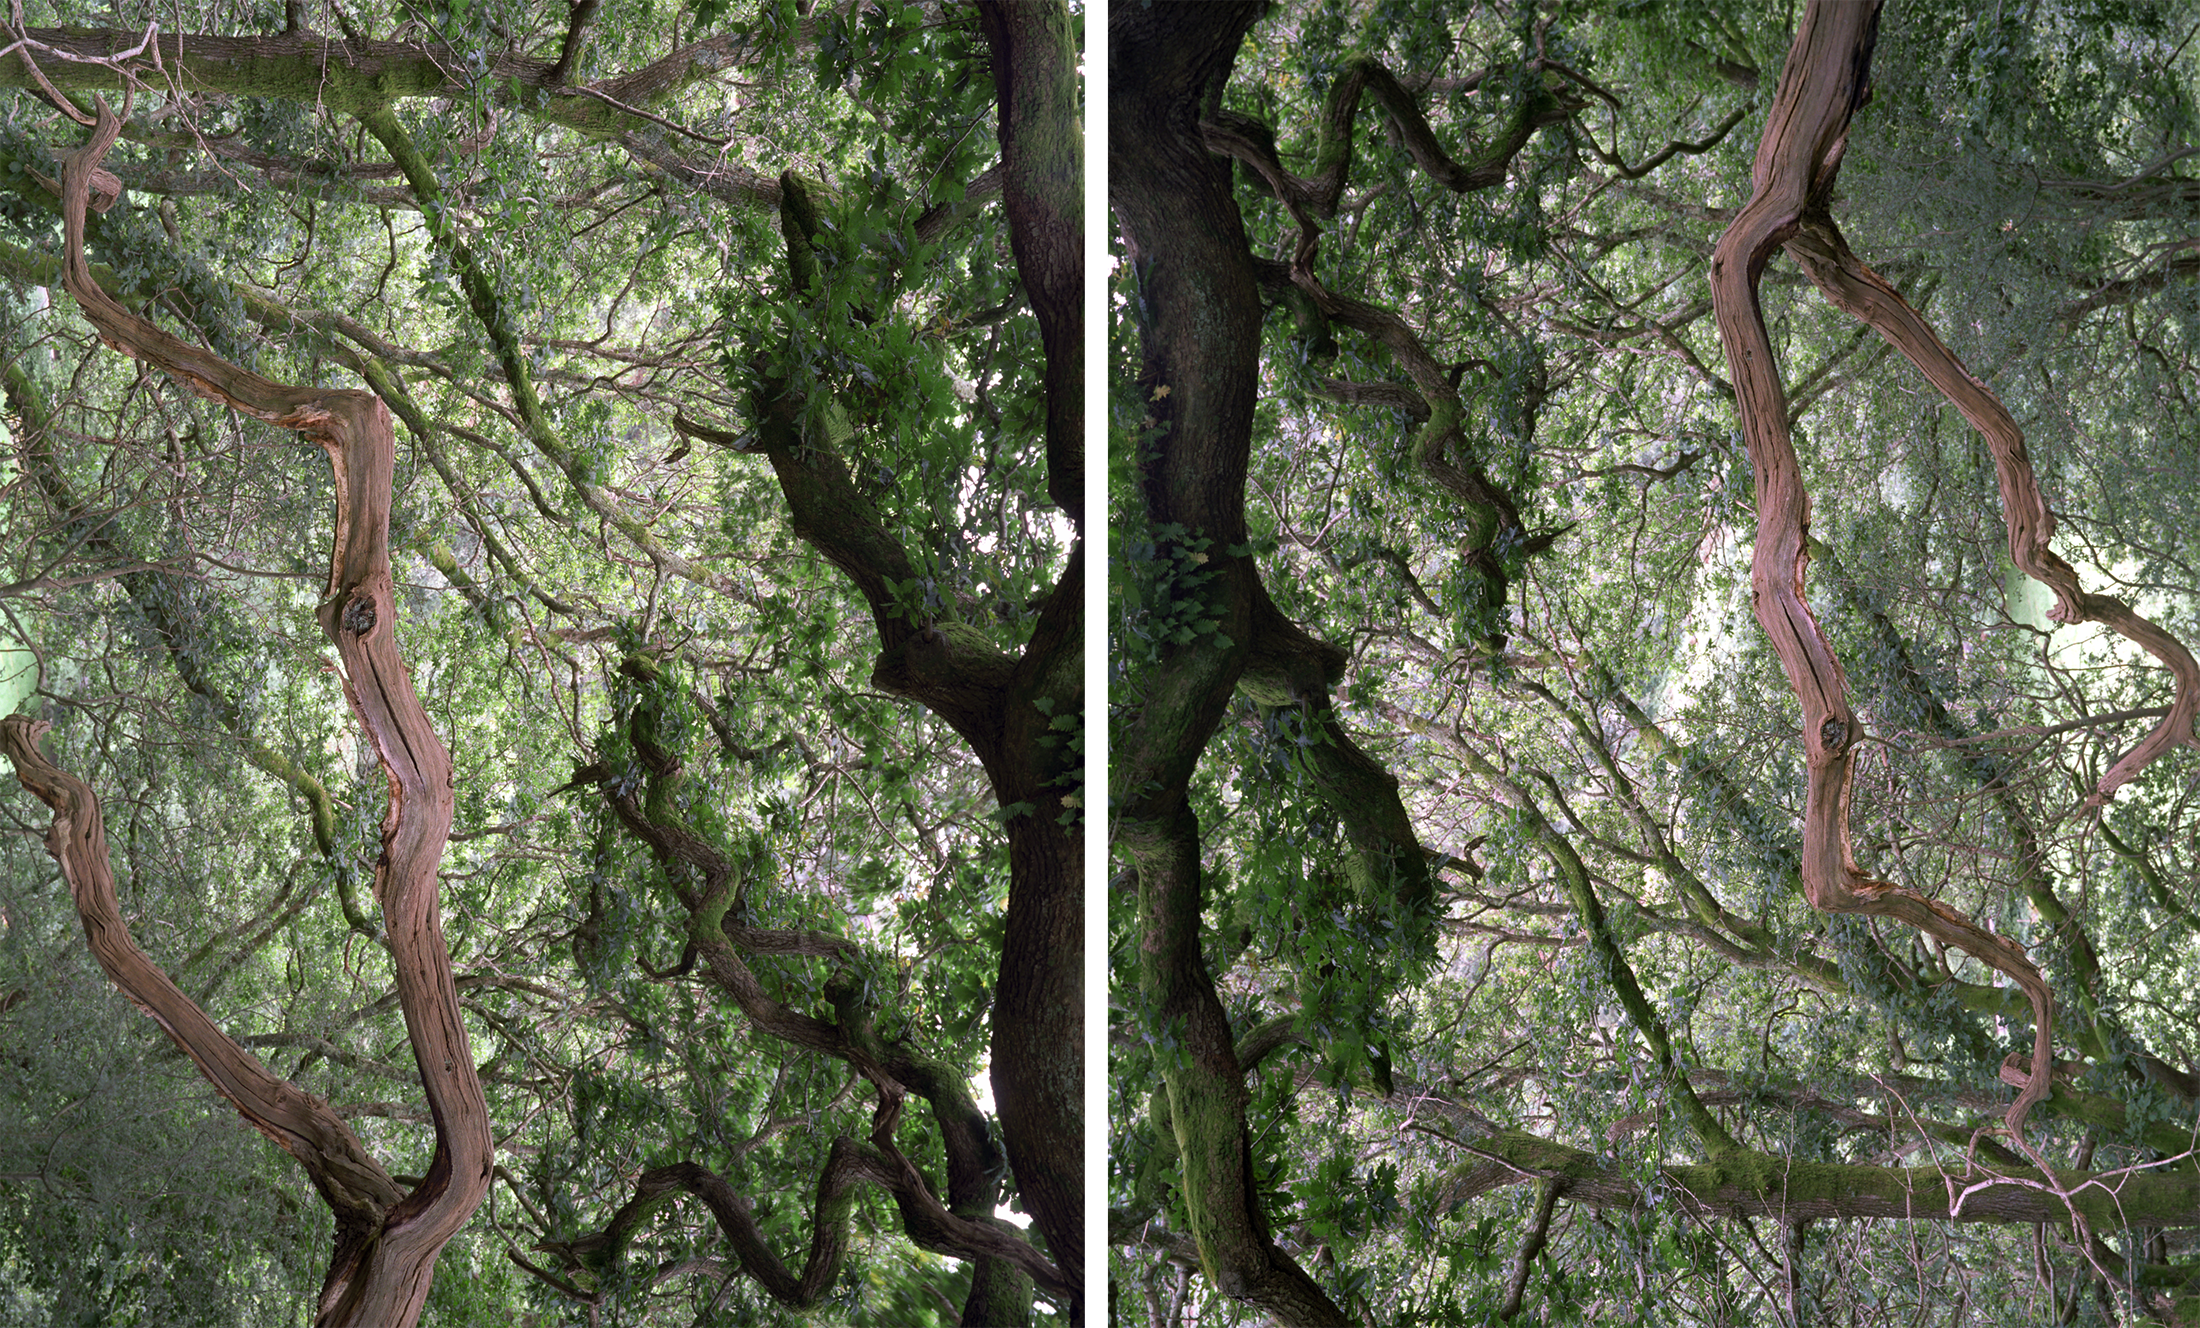 ONCE IN A GREAT WHILE (diptych) / 2013